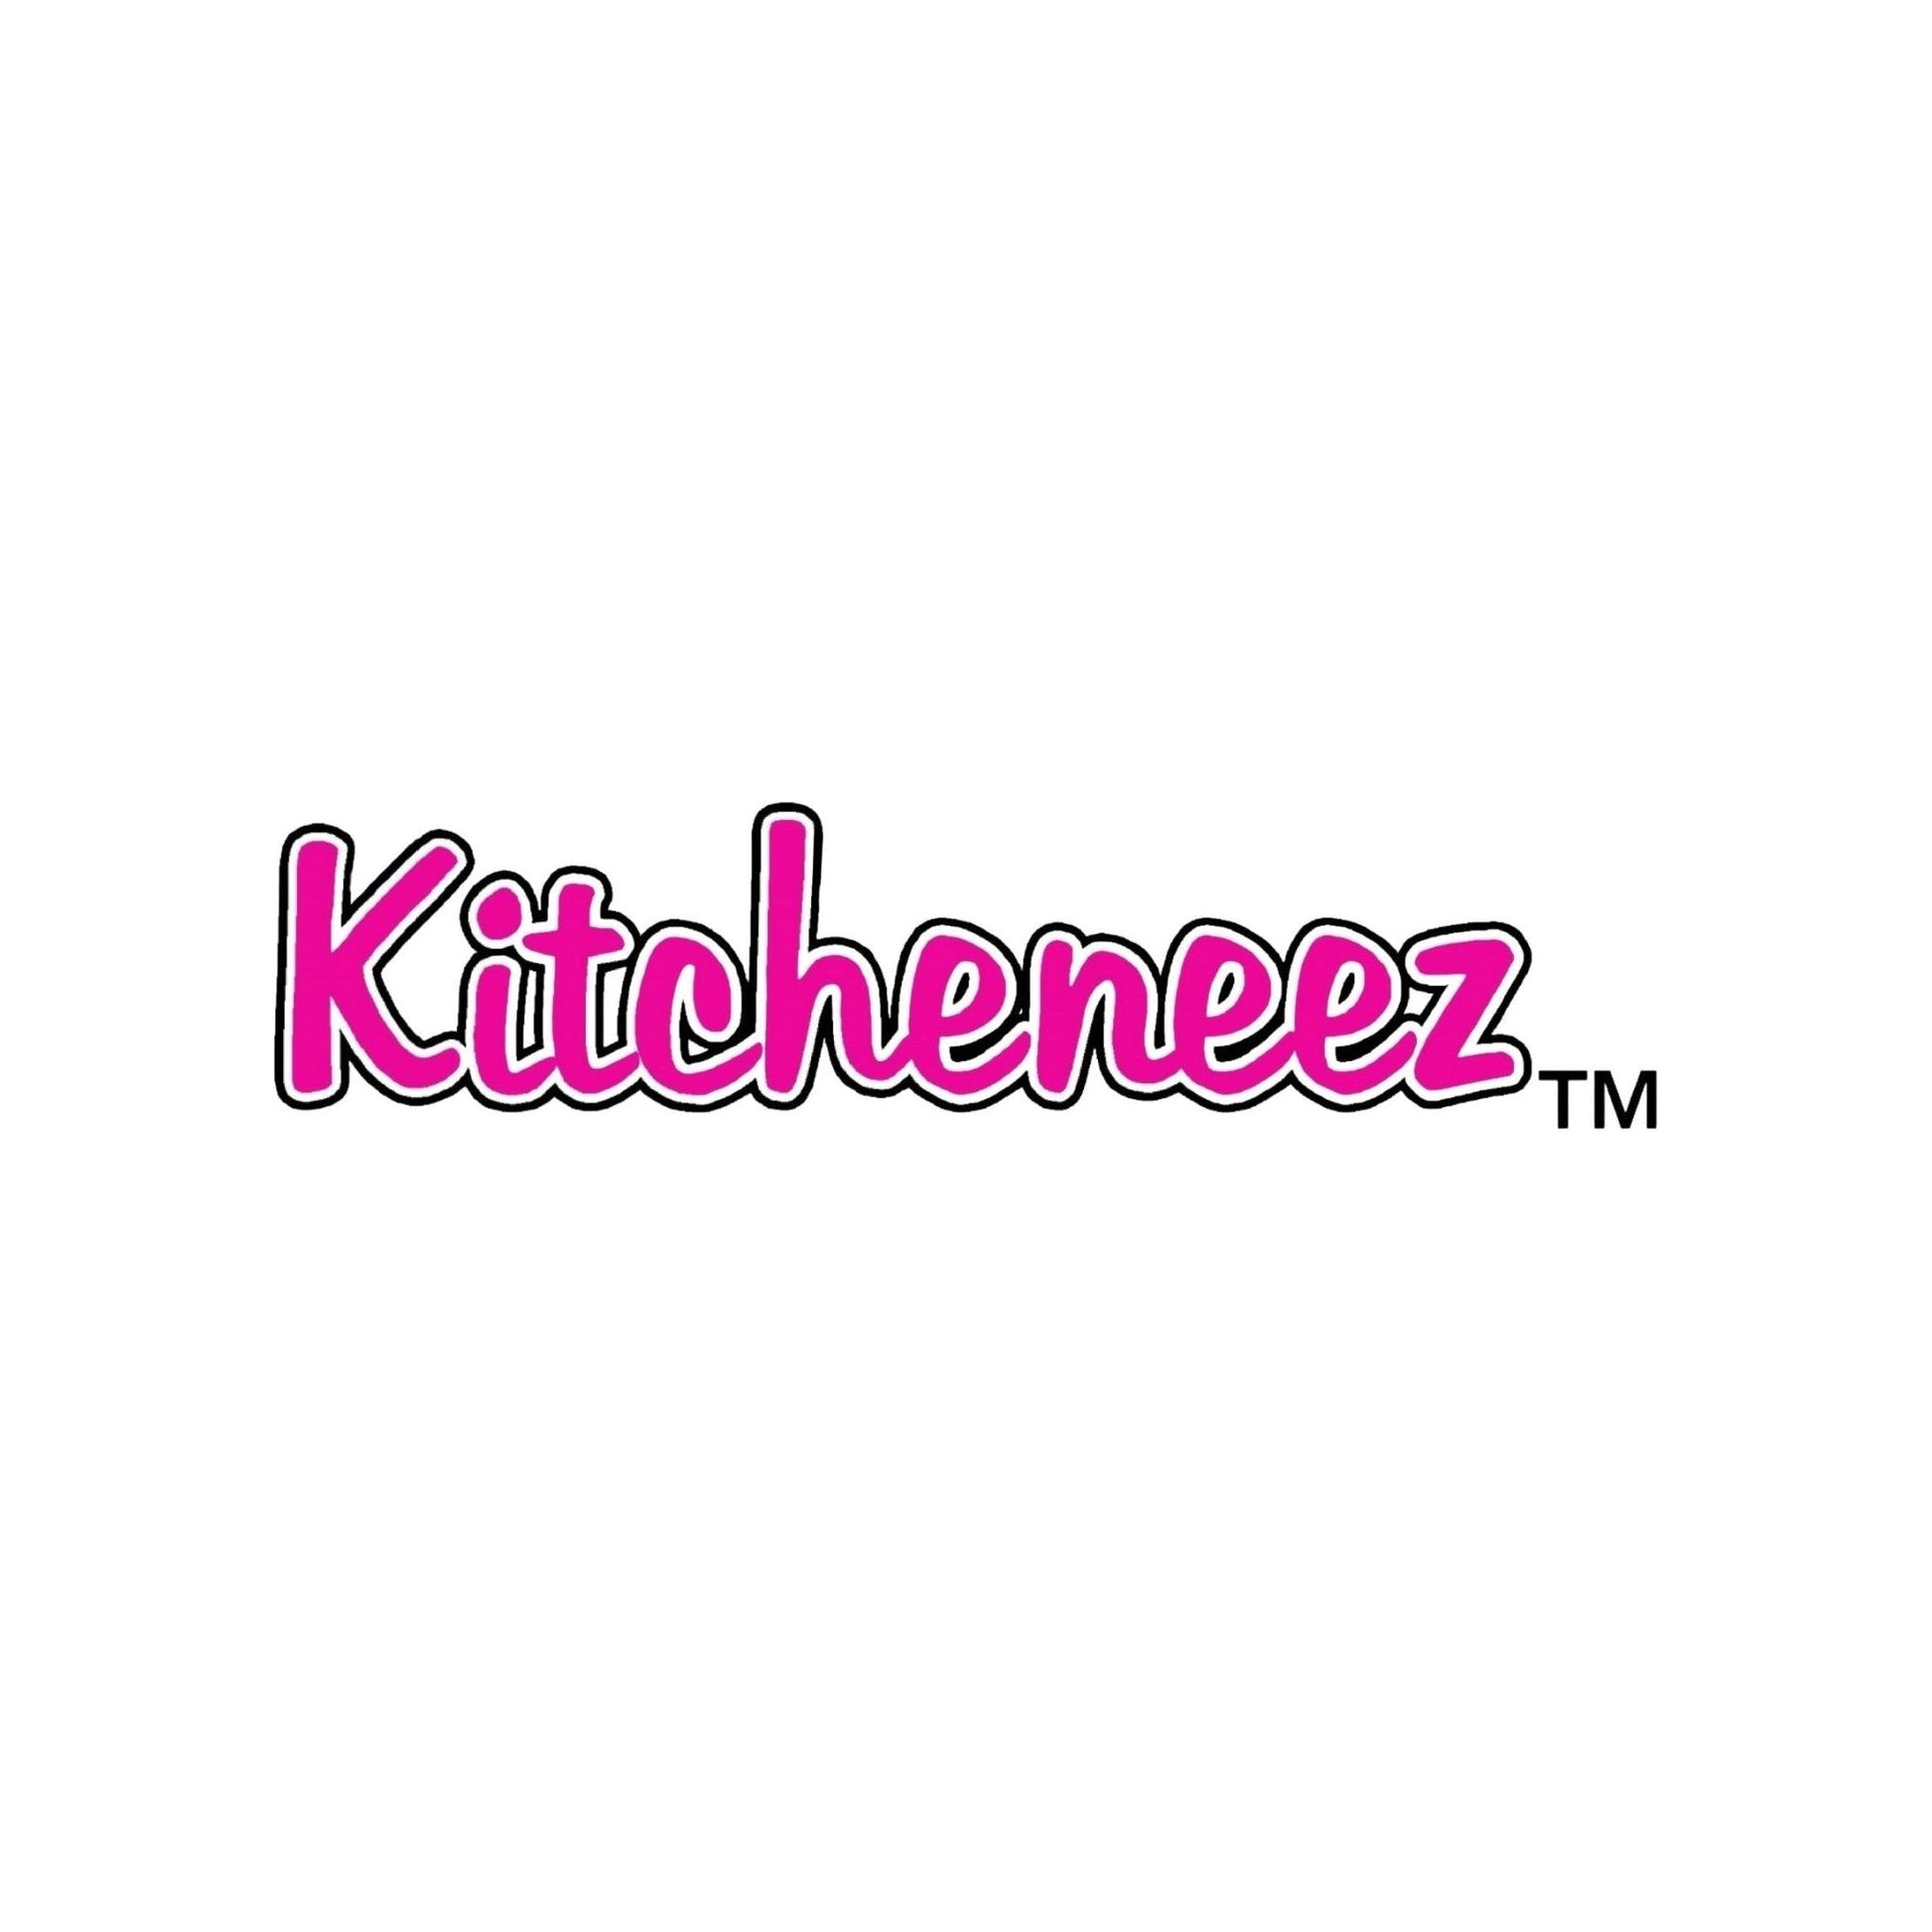 Become a Sales Representative- $9.95 monthly - Kitcheneez Mixes & More!